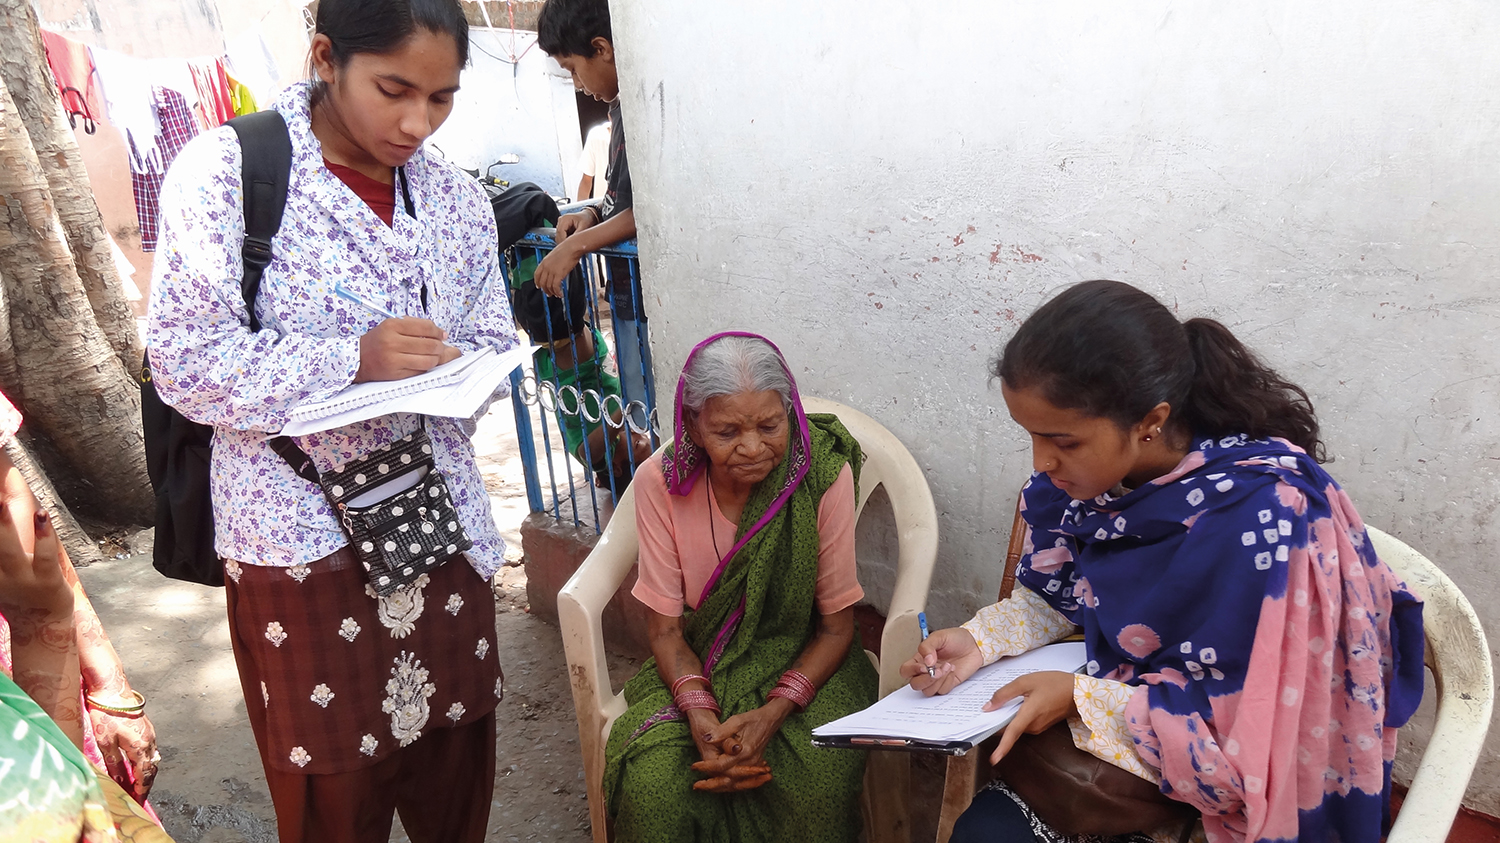 Two female data collectors take information from a woman in Bhopal, India. Two of the women sit on chairs inside and the other stands next to them, writing.